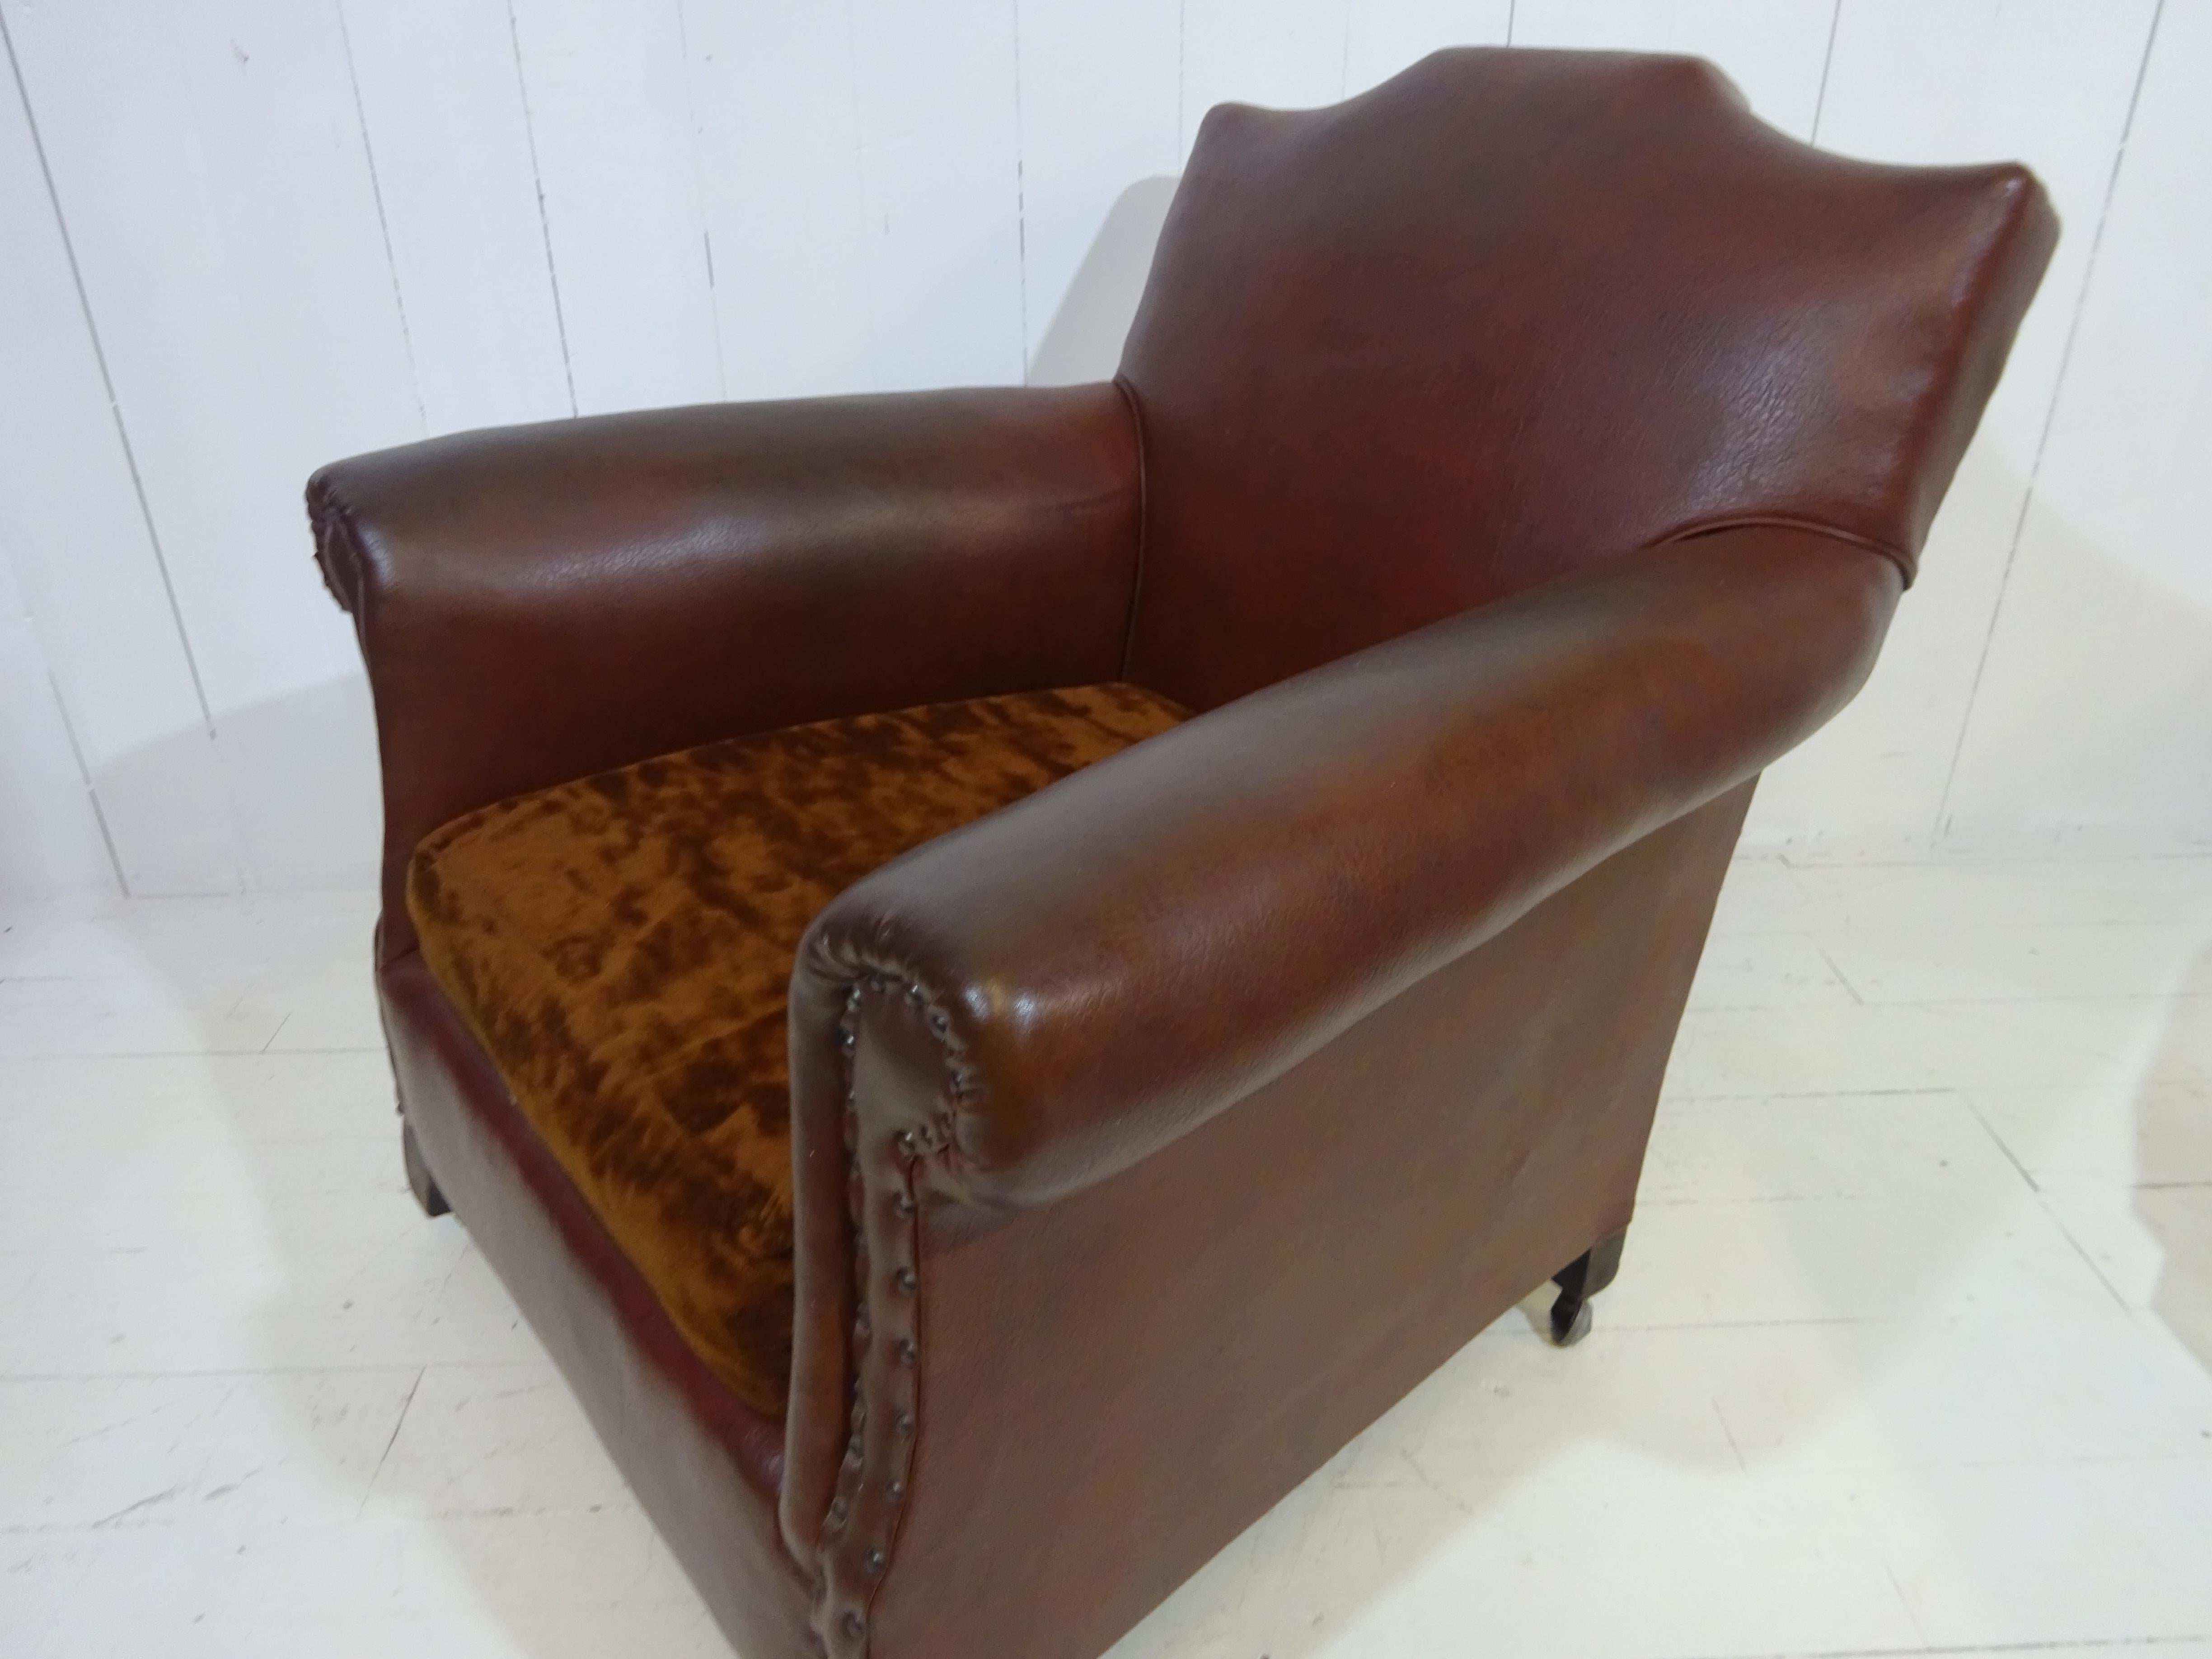 Art Deco Club chair

An original art deco armchair that has been with the same family from new! Lovely shape, design, style and a quality build. 
Chair has a solid beech framework making the chair stable and sturdy. The design enables a